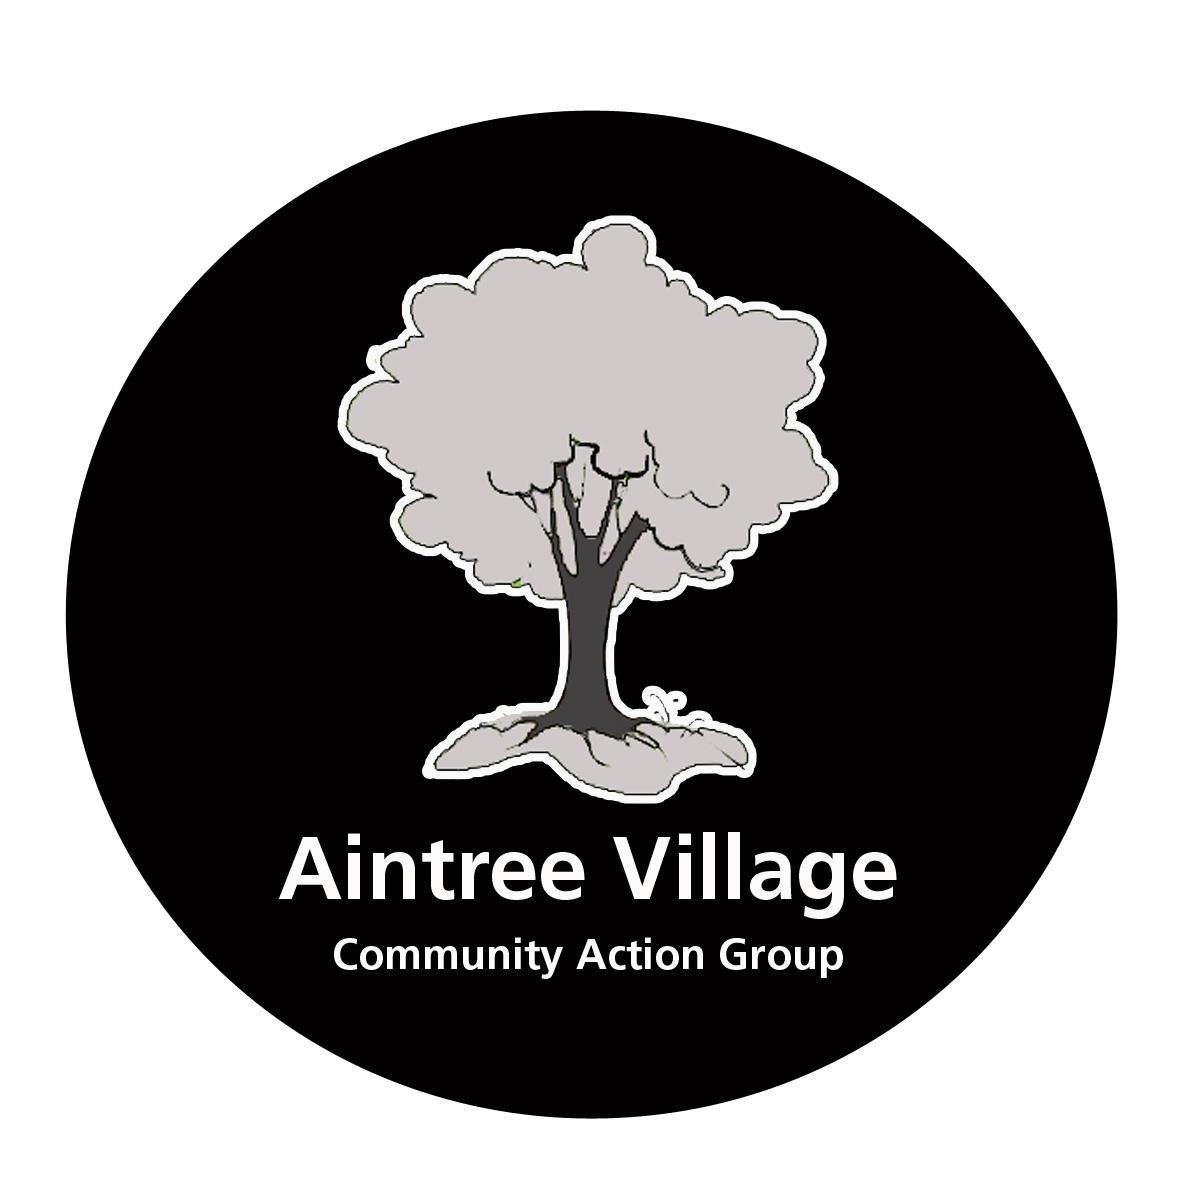 The Aintree Village Community Action Group representing the views of Aintree Residents http://t.co/l5cUM6HJic